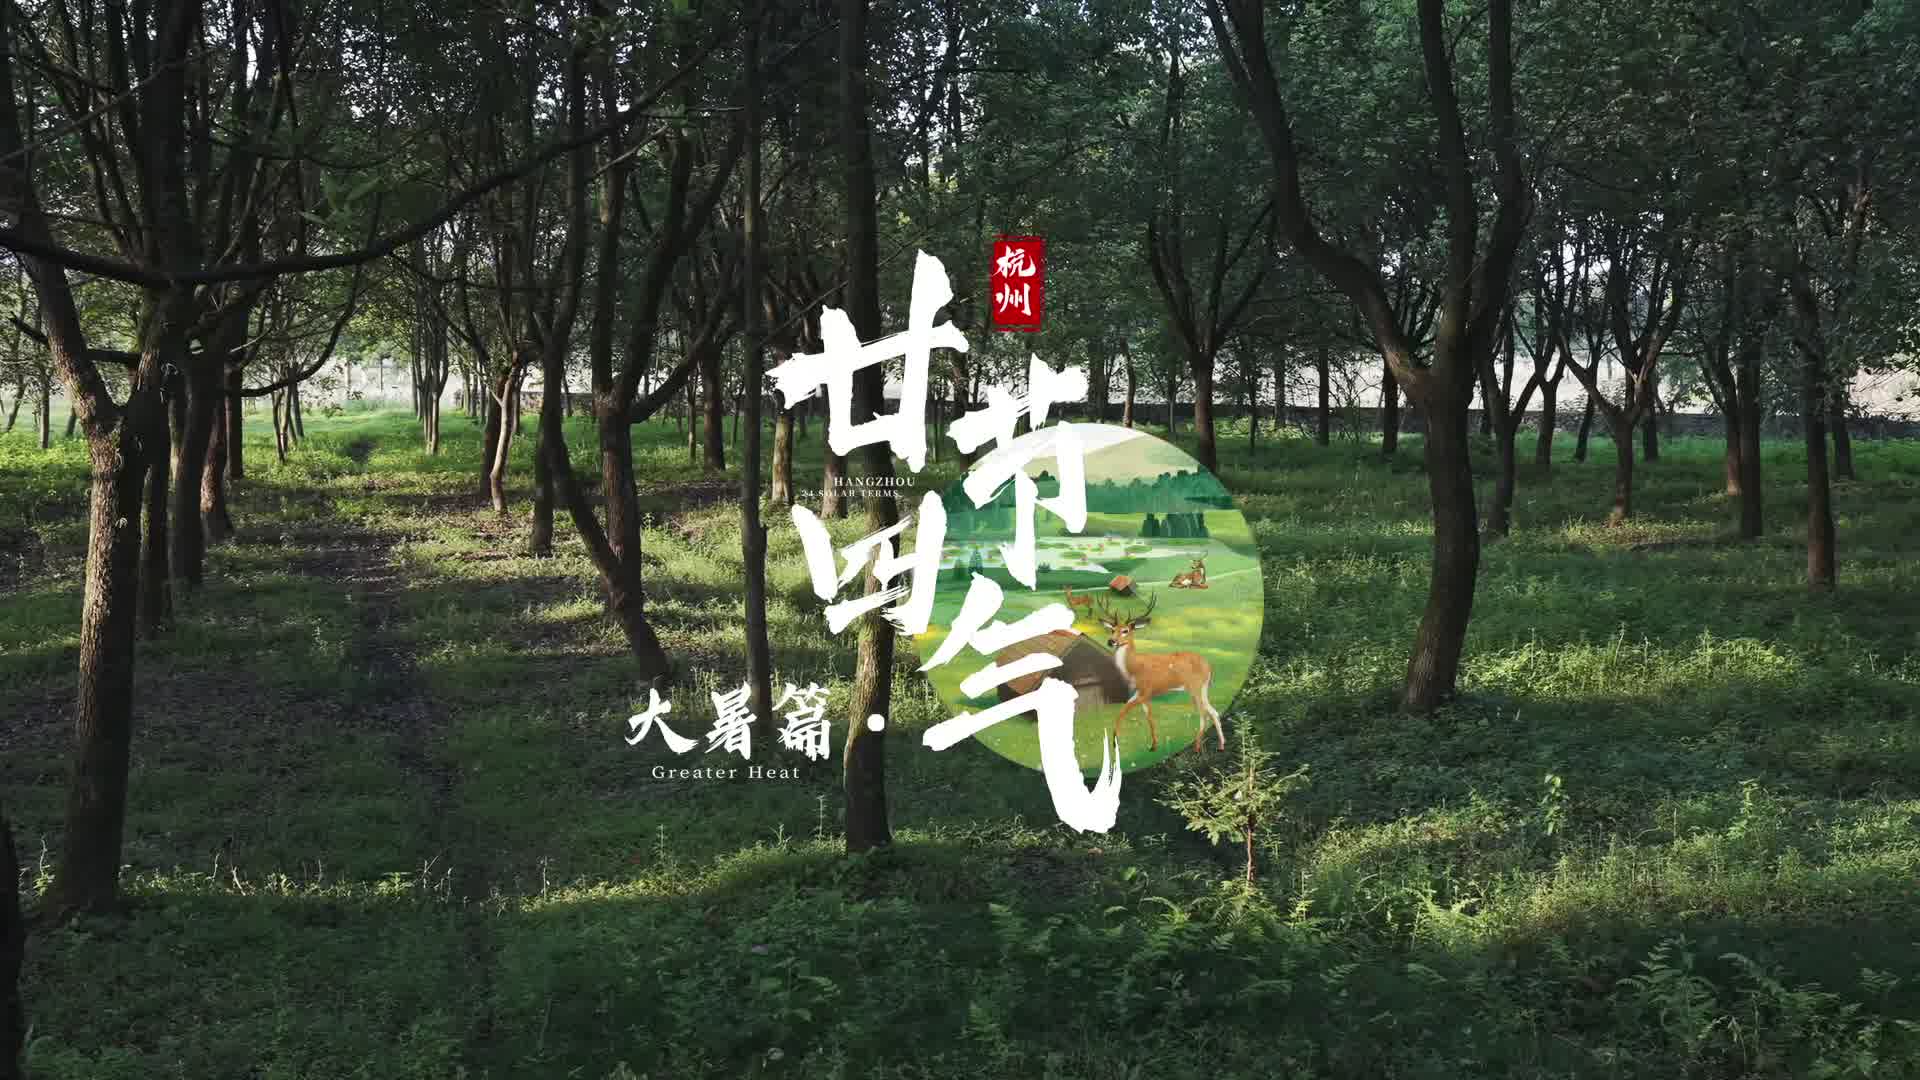 24 solar terms in Hangzhou: Everything's so lovely during Major Heat